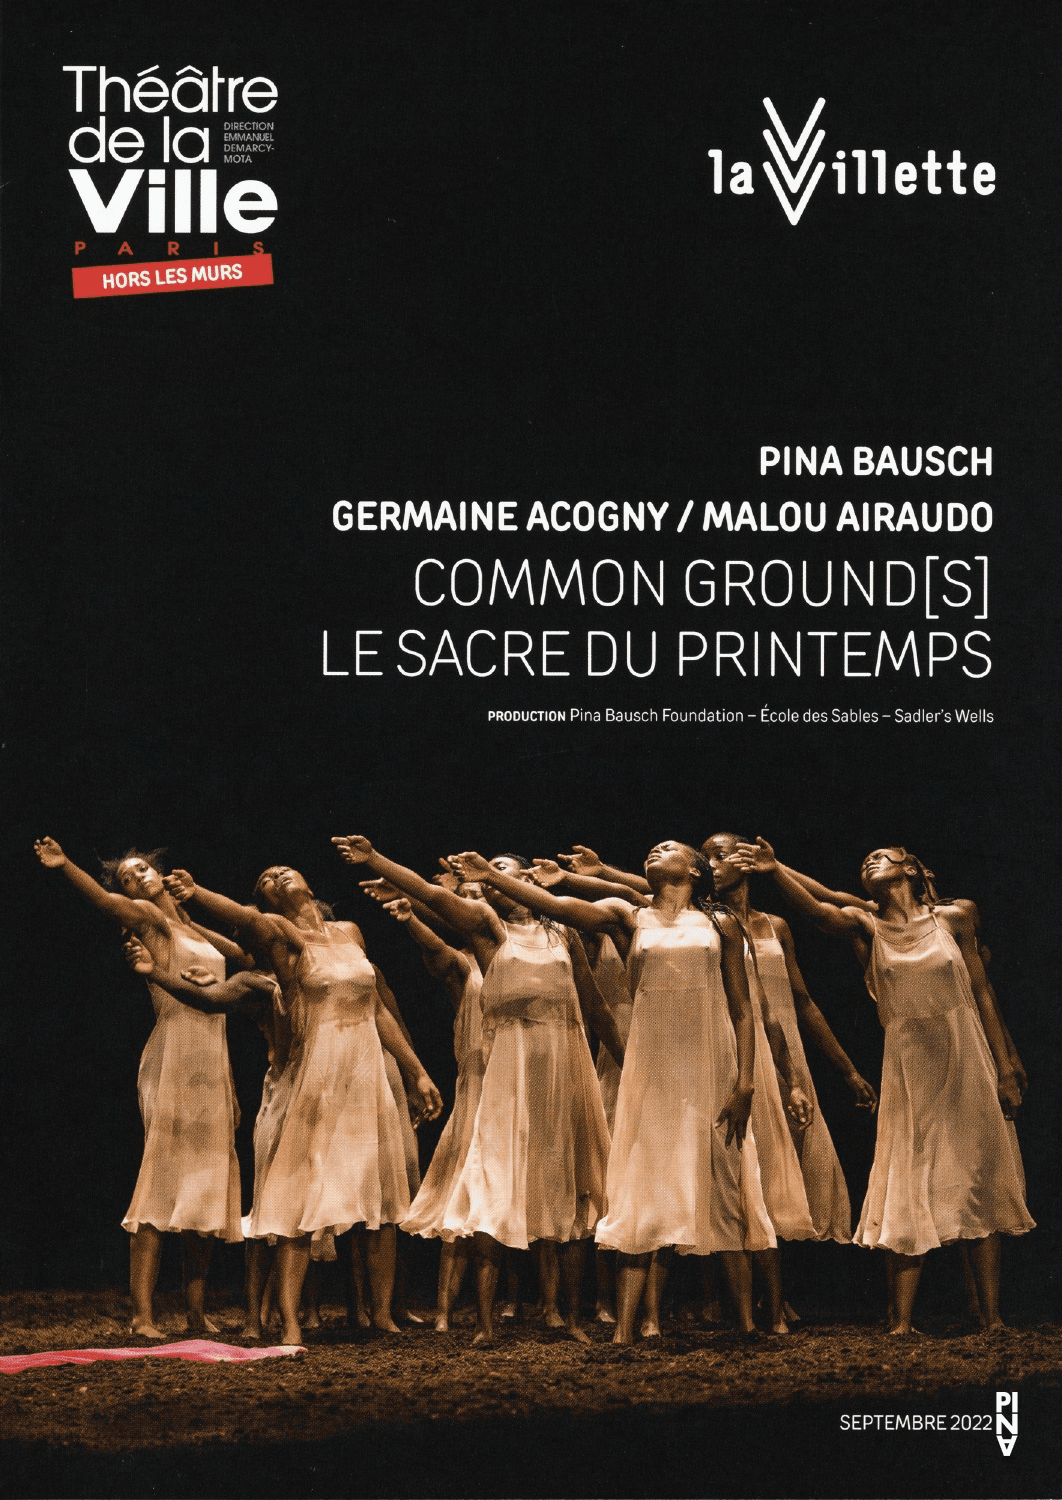 Booklet for “common ground[s]” by Malou Airaudo and Germaine Acogny with Germaine Acogny & Malou Airaudo, “The Rite of Spring” by Pina Bausch with Ensemble Rite of Spring and “common ground[s]” by Malou Airaudo and Germaine Acogny with Ensemble Rite of Spring and Germaine Acogny & Malou Airaudo in in Paris, 09/19/2022 – 09/30/2022